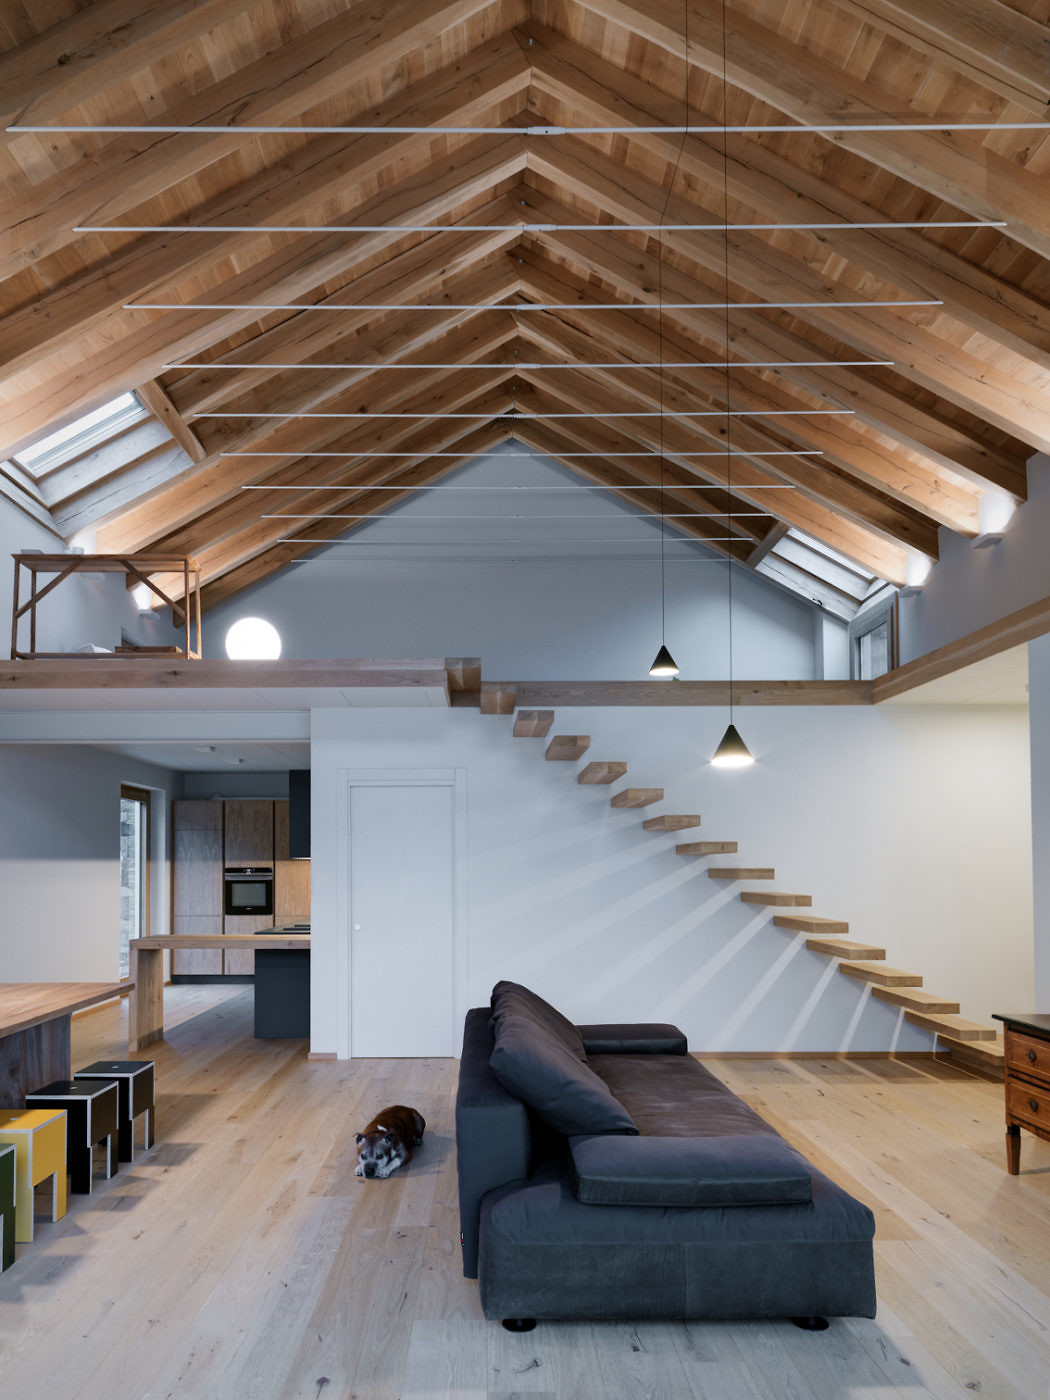 Spacious loft with exposed wooden beams, floating staircase, and a cozy seating area